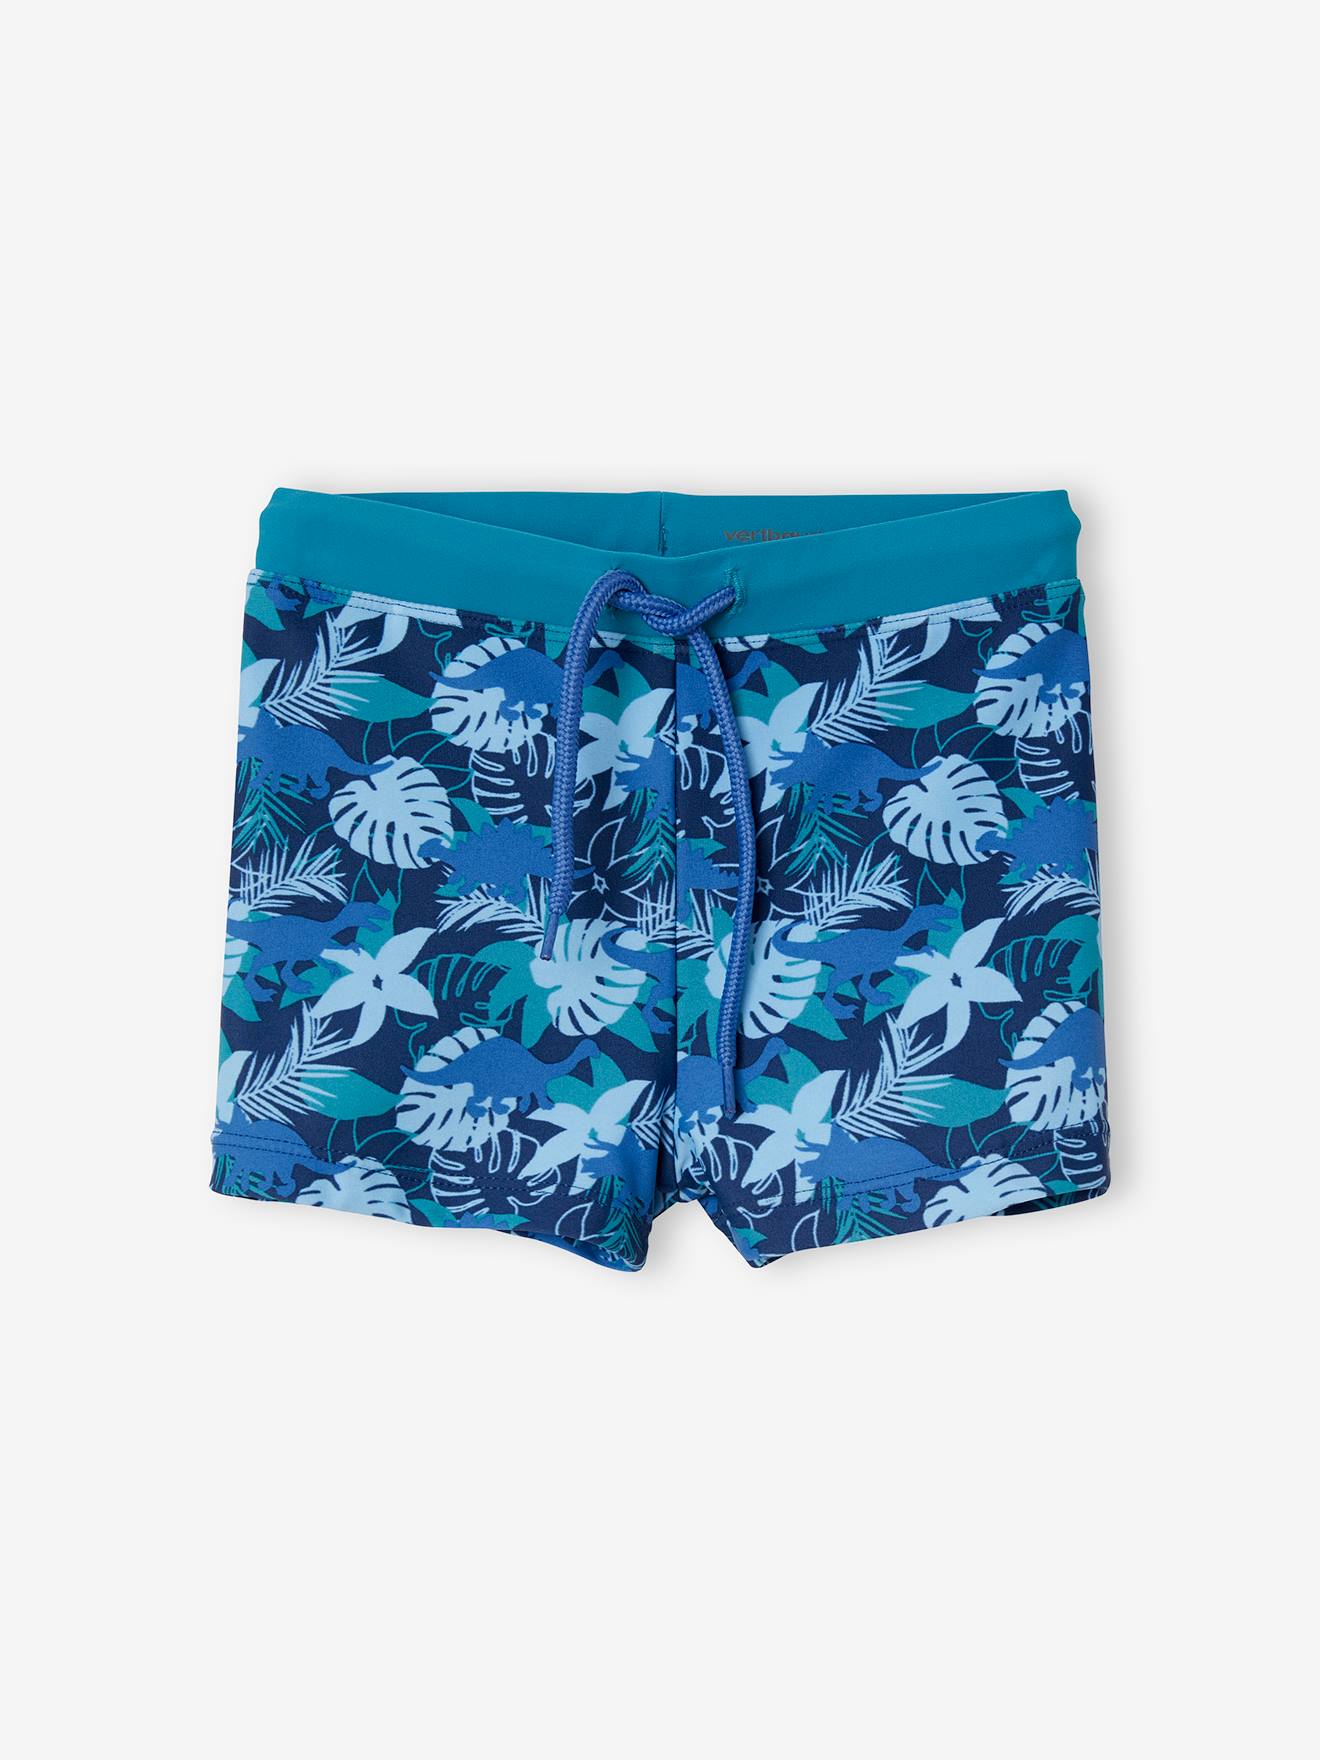 Boys Swimming Shorts Pants Trunks Age 678910111213 Years 